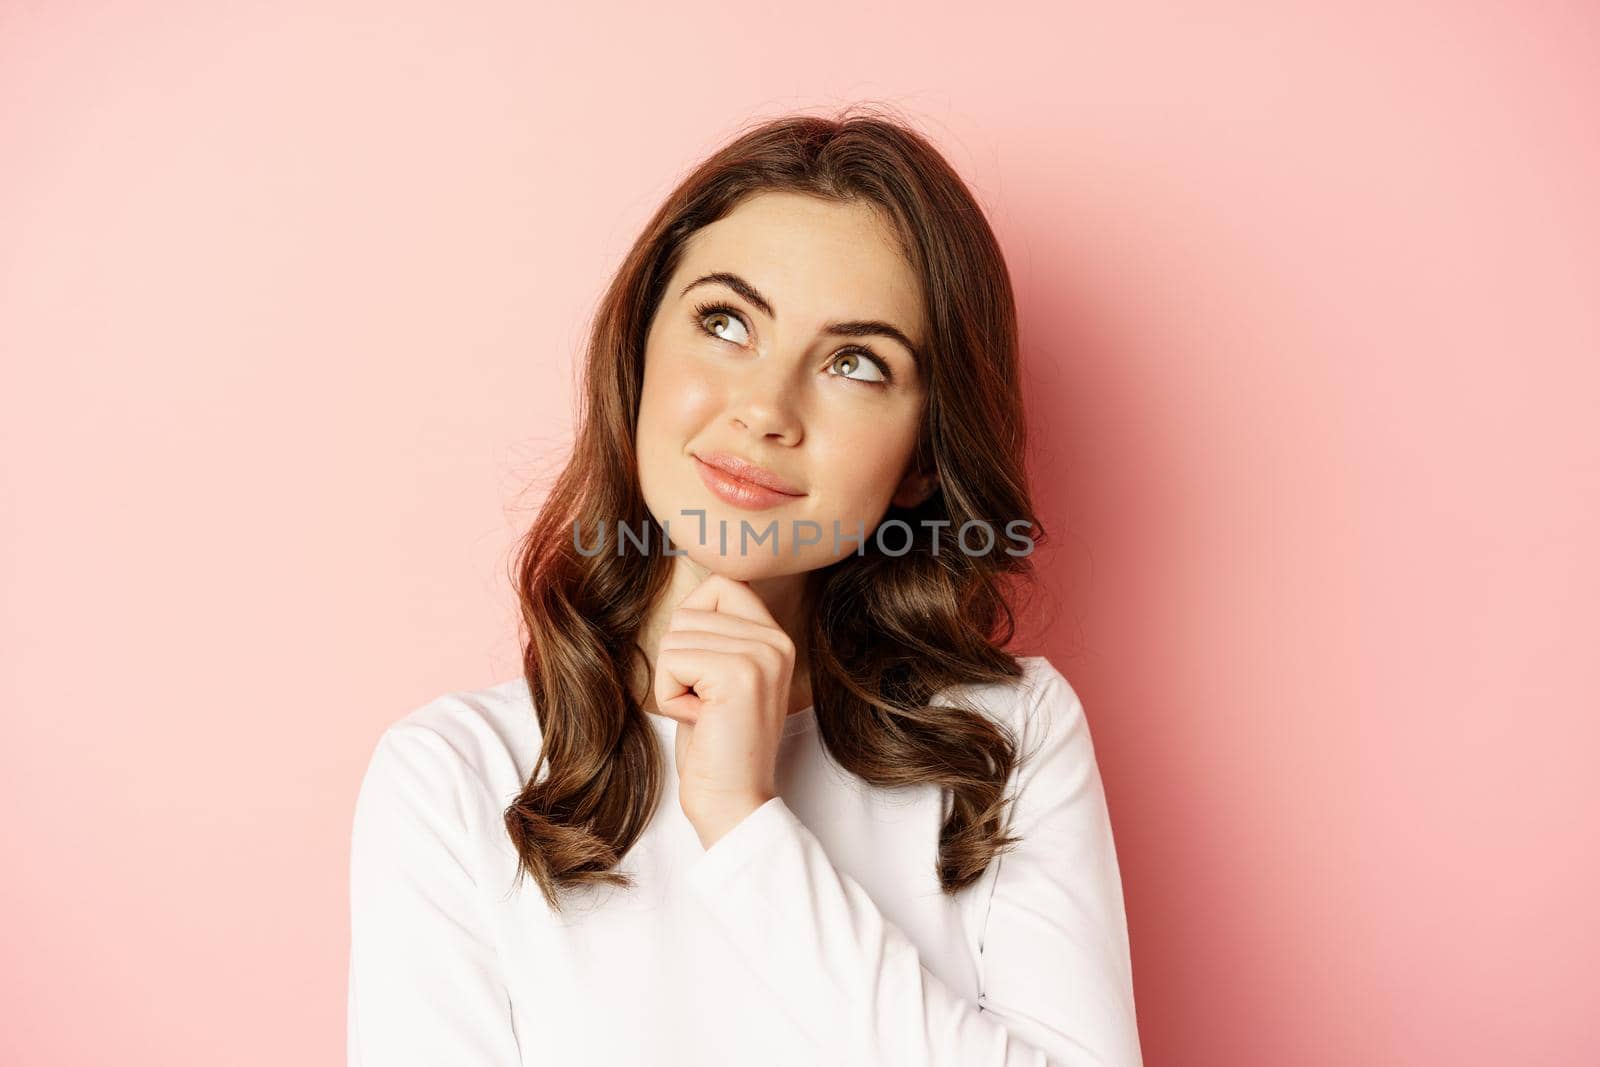 Close up portrait of coquettish smiling woman, glamour girl thinking, looking thoughtful, standing over pink background.